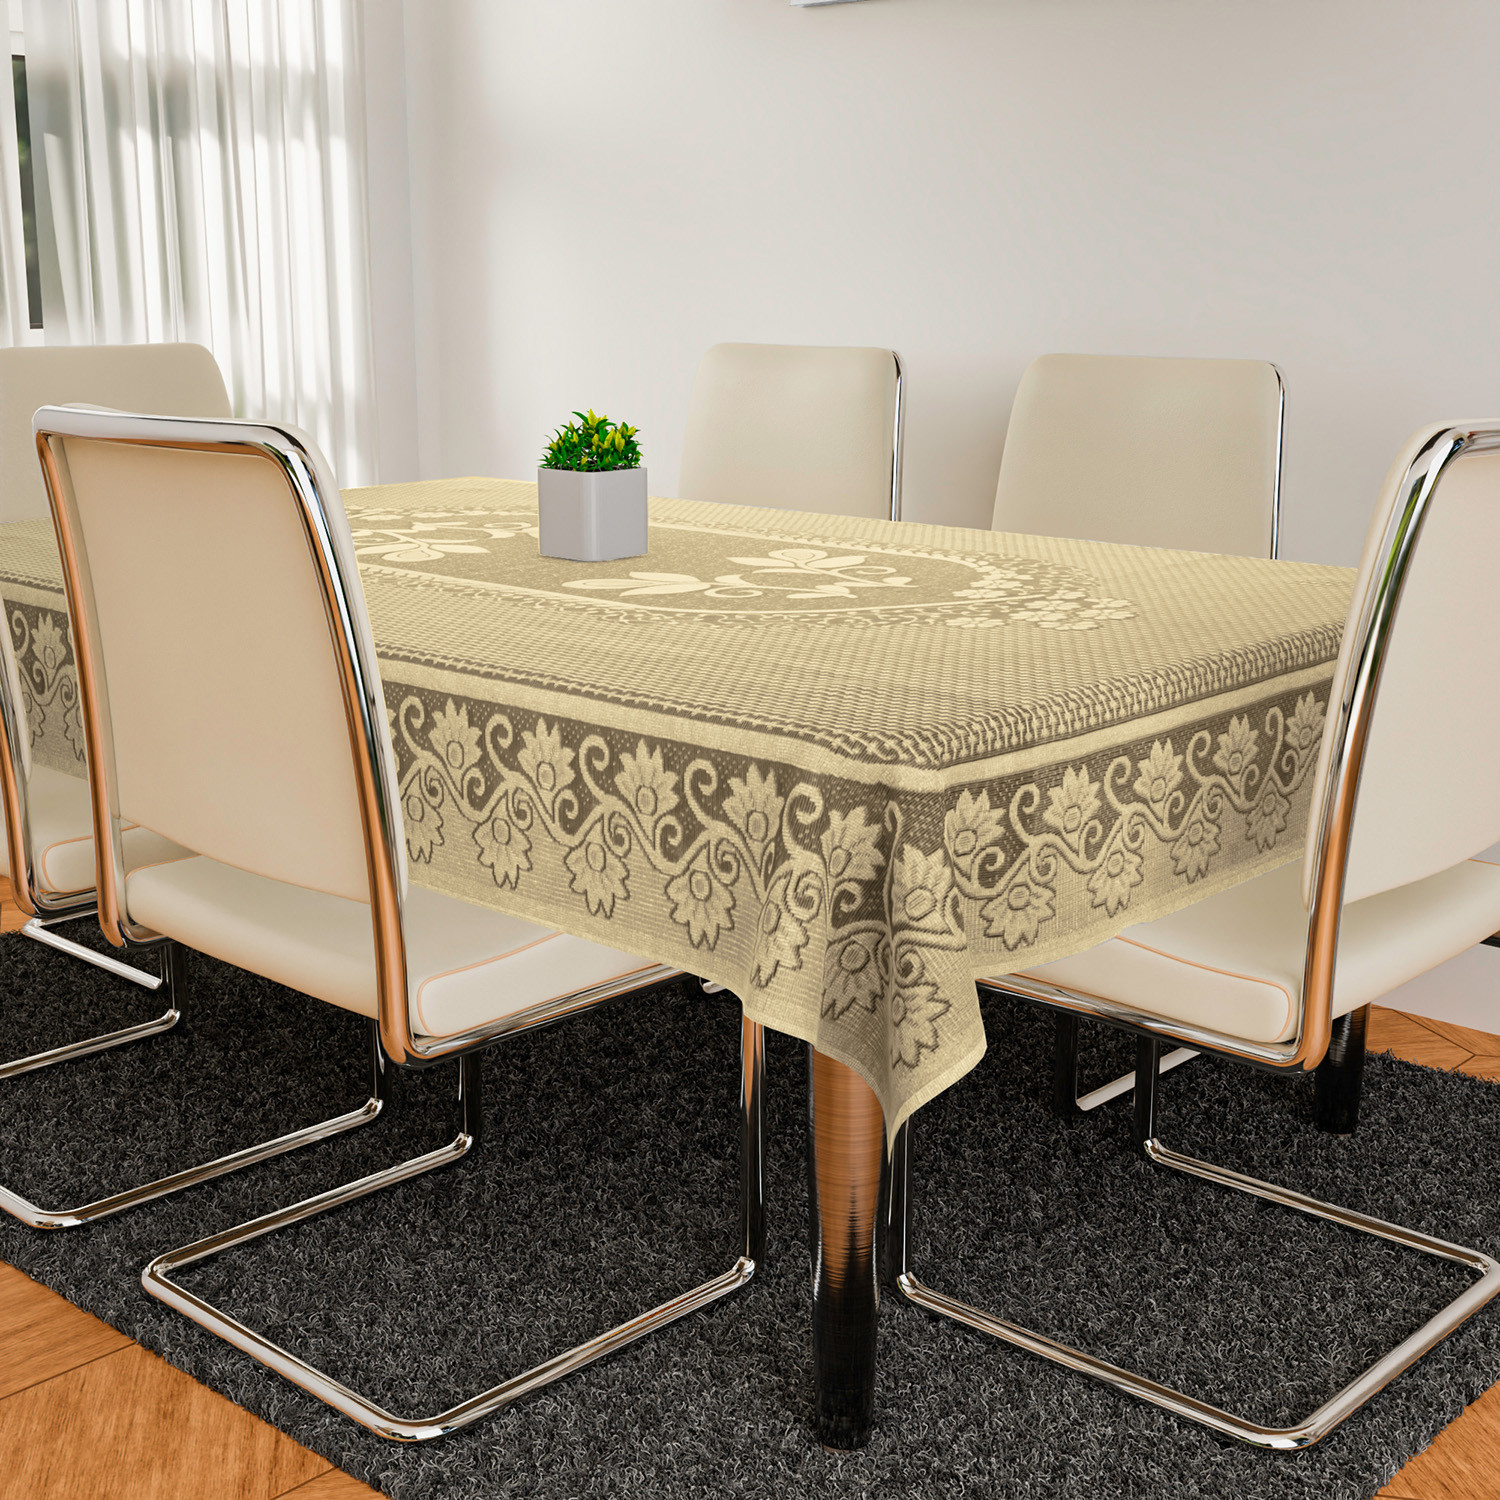 Kuber Industries Dining Table Cover| Luxurious Net Floral S-19 Design|Cotton Anti Skid & Waterproof Tablecloth for Home Decoration|60X90 Inch (Cream)